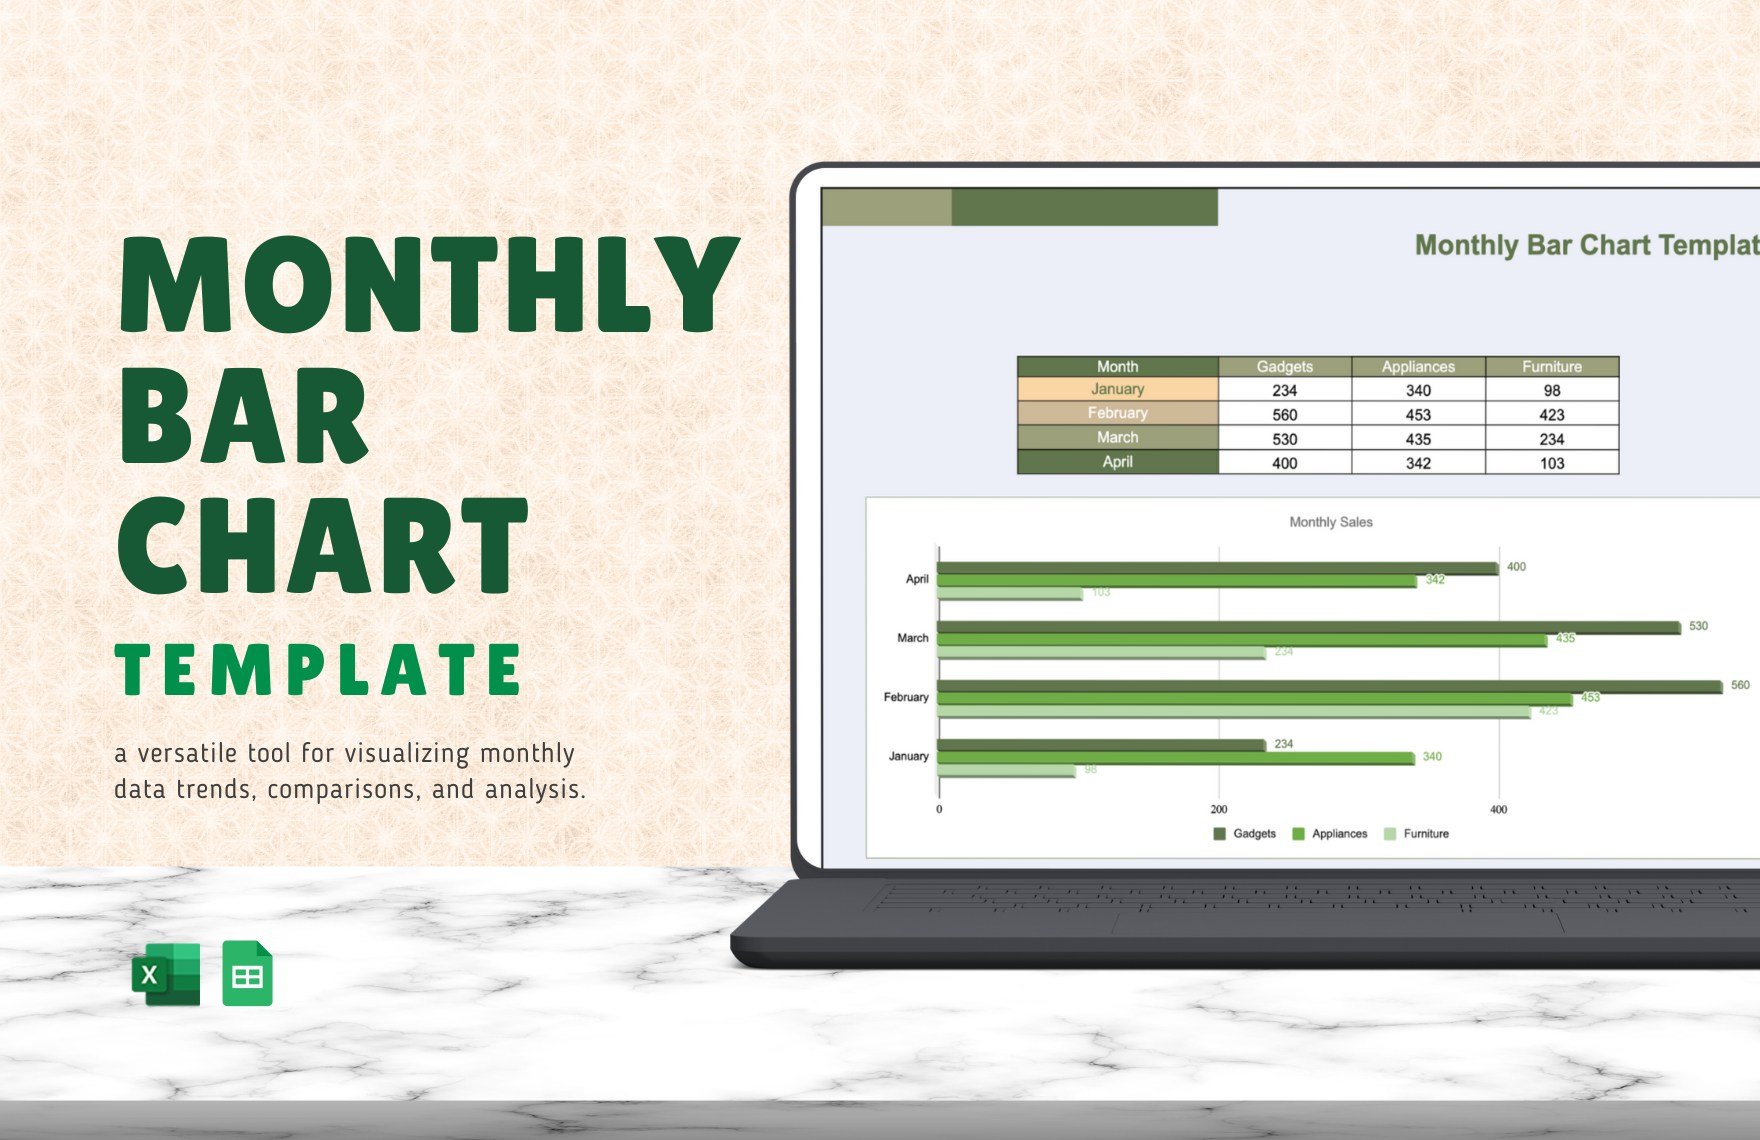 Monthly Bar Chart Template in Excel, Google Sheets